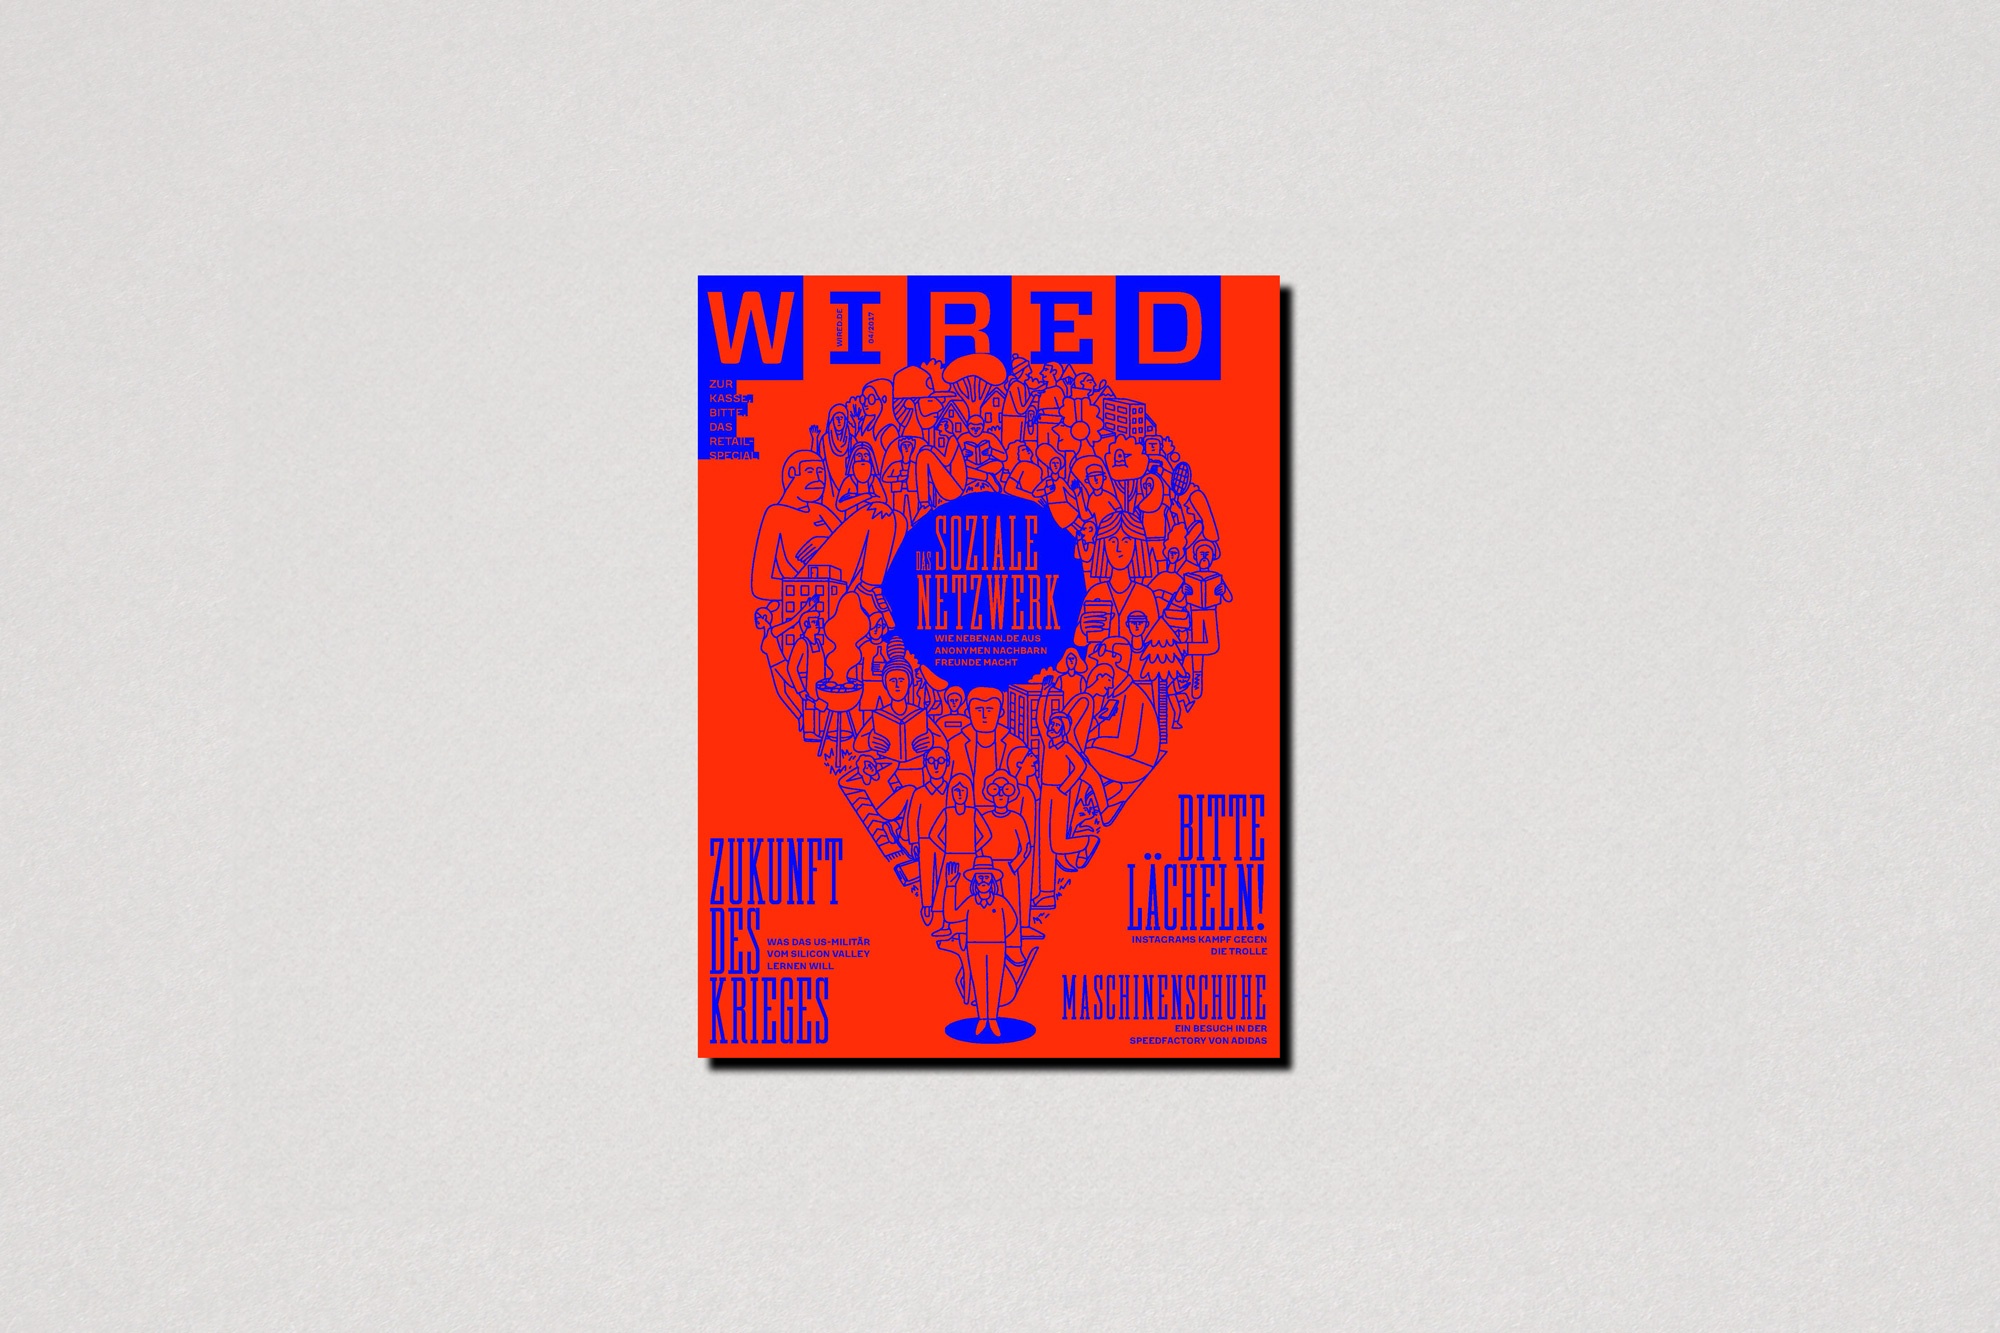 Wired magazine technology cover illustration by Christopher de Lorenzo